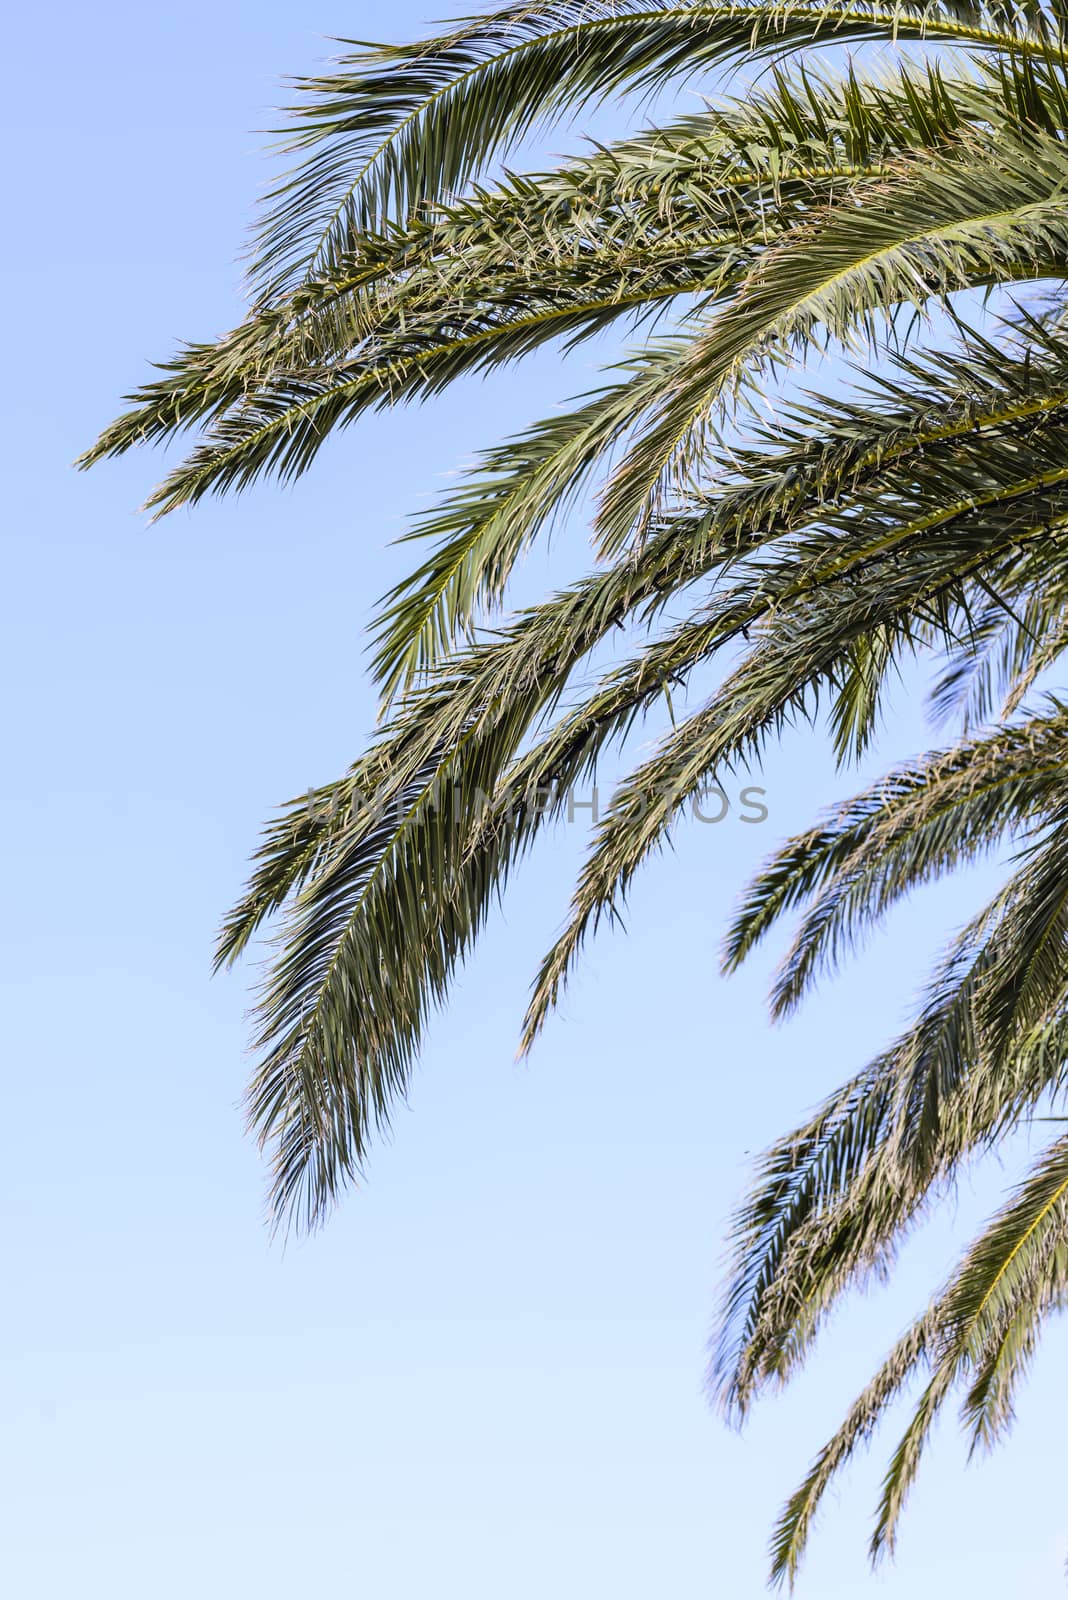 Branches of a palm tree against a clear blue sky